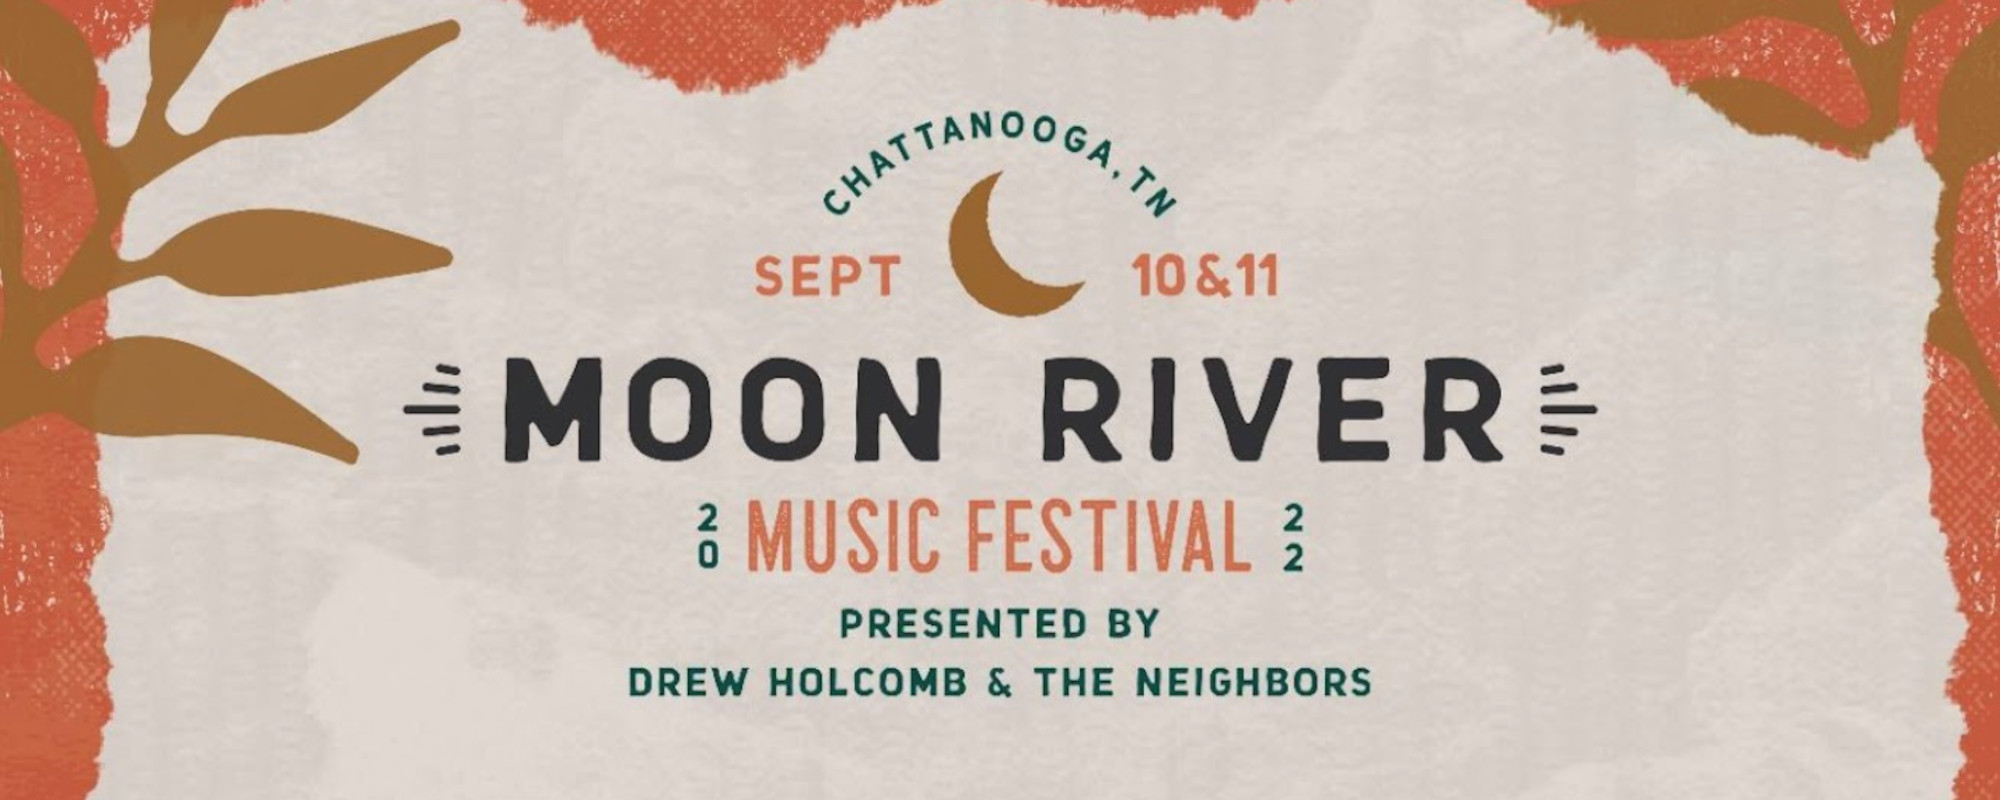 Moon River Festival Announces 2022 Lineup with Leon Bridges and The National Headlining